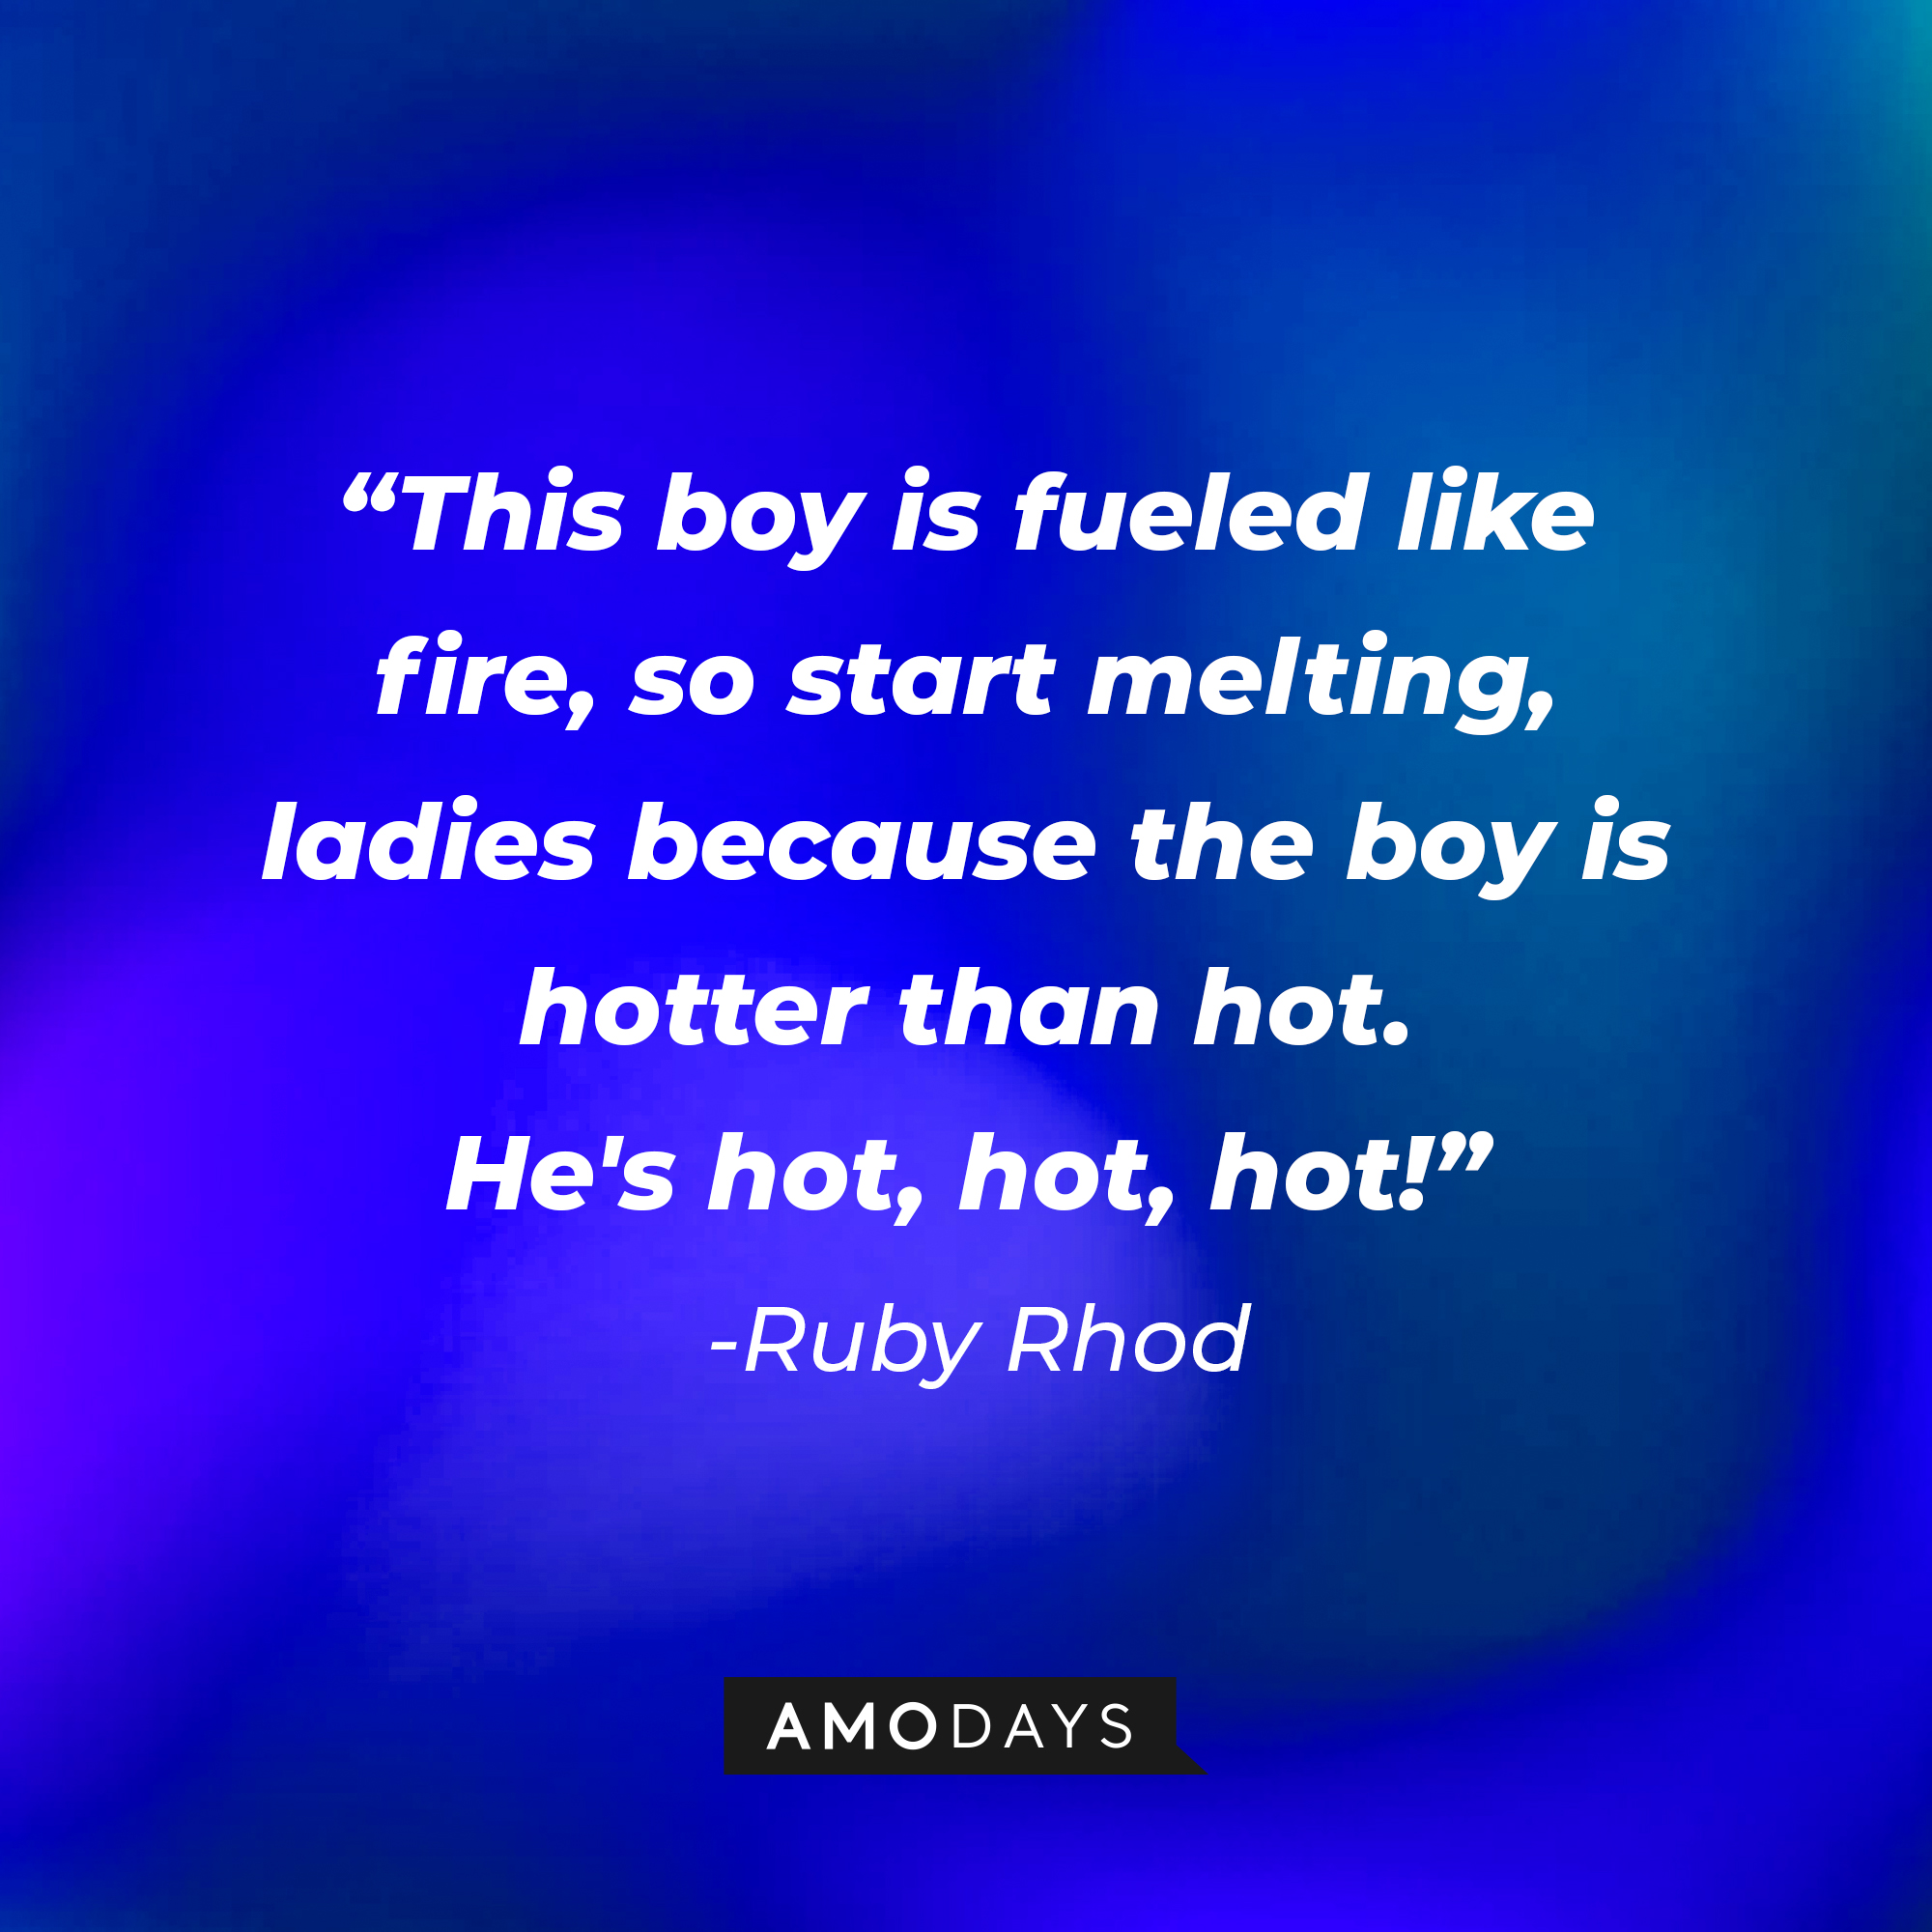 A photo with the quote, "This boy is fueled like fire, so start melting, ladies because the boy is hotter than hot. He's hot, hot, hot!" | Source: Amodays